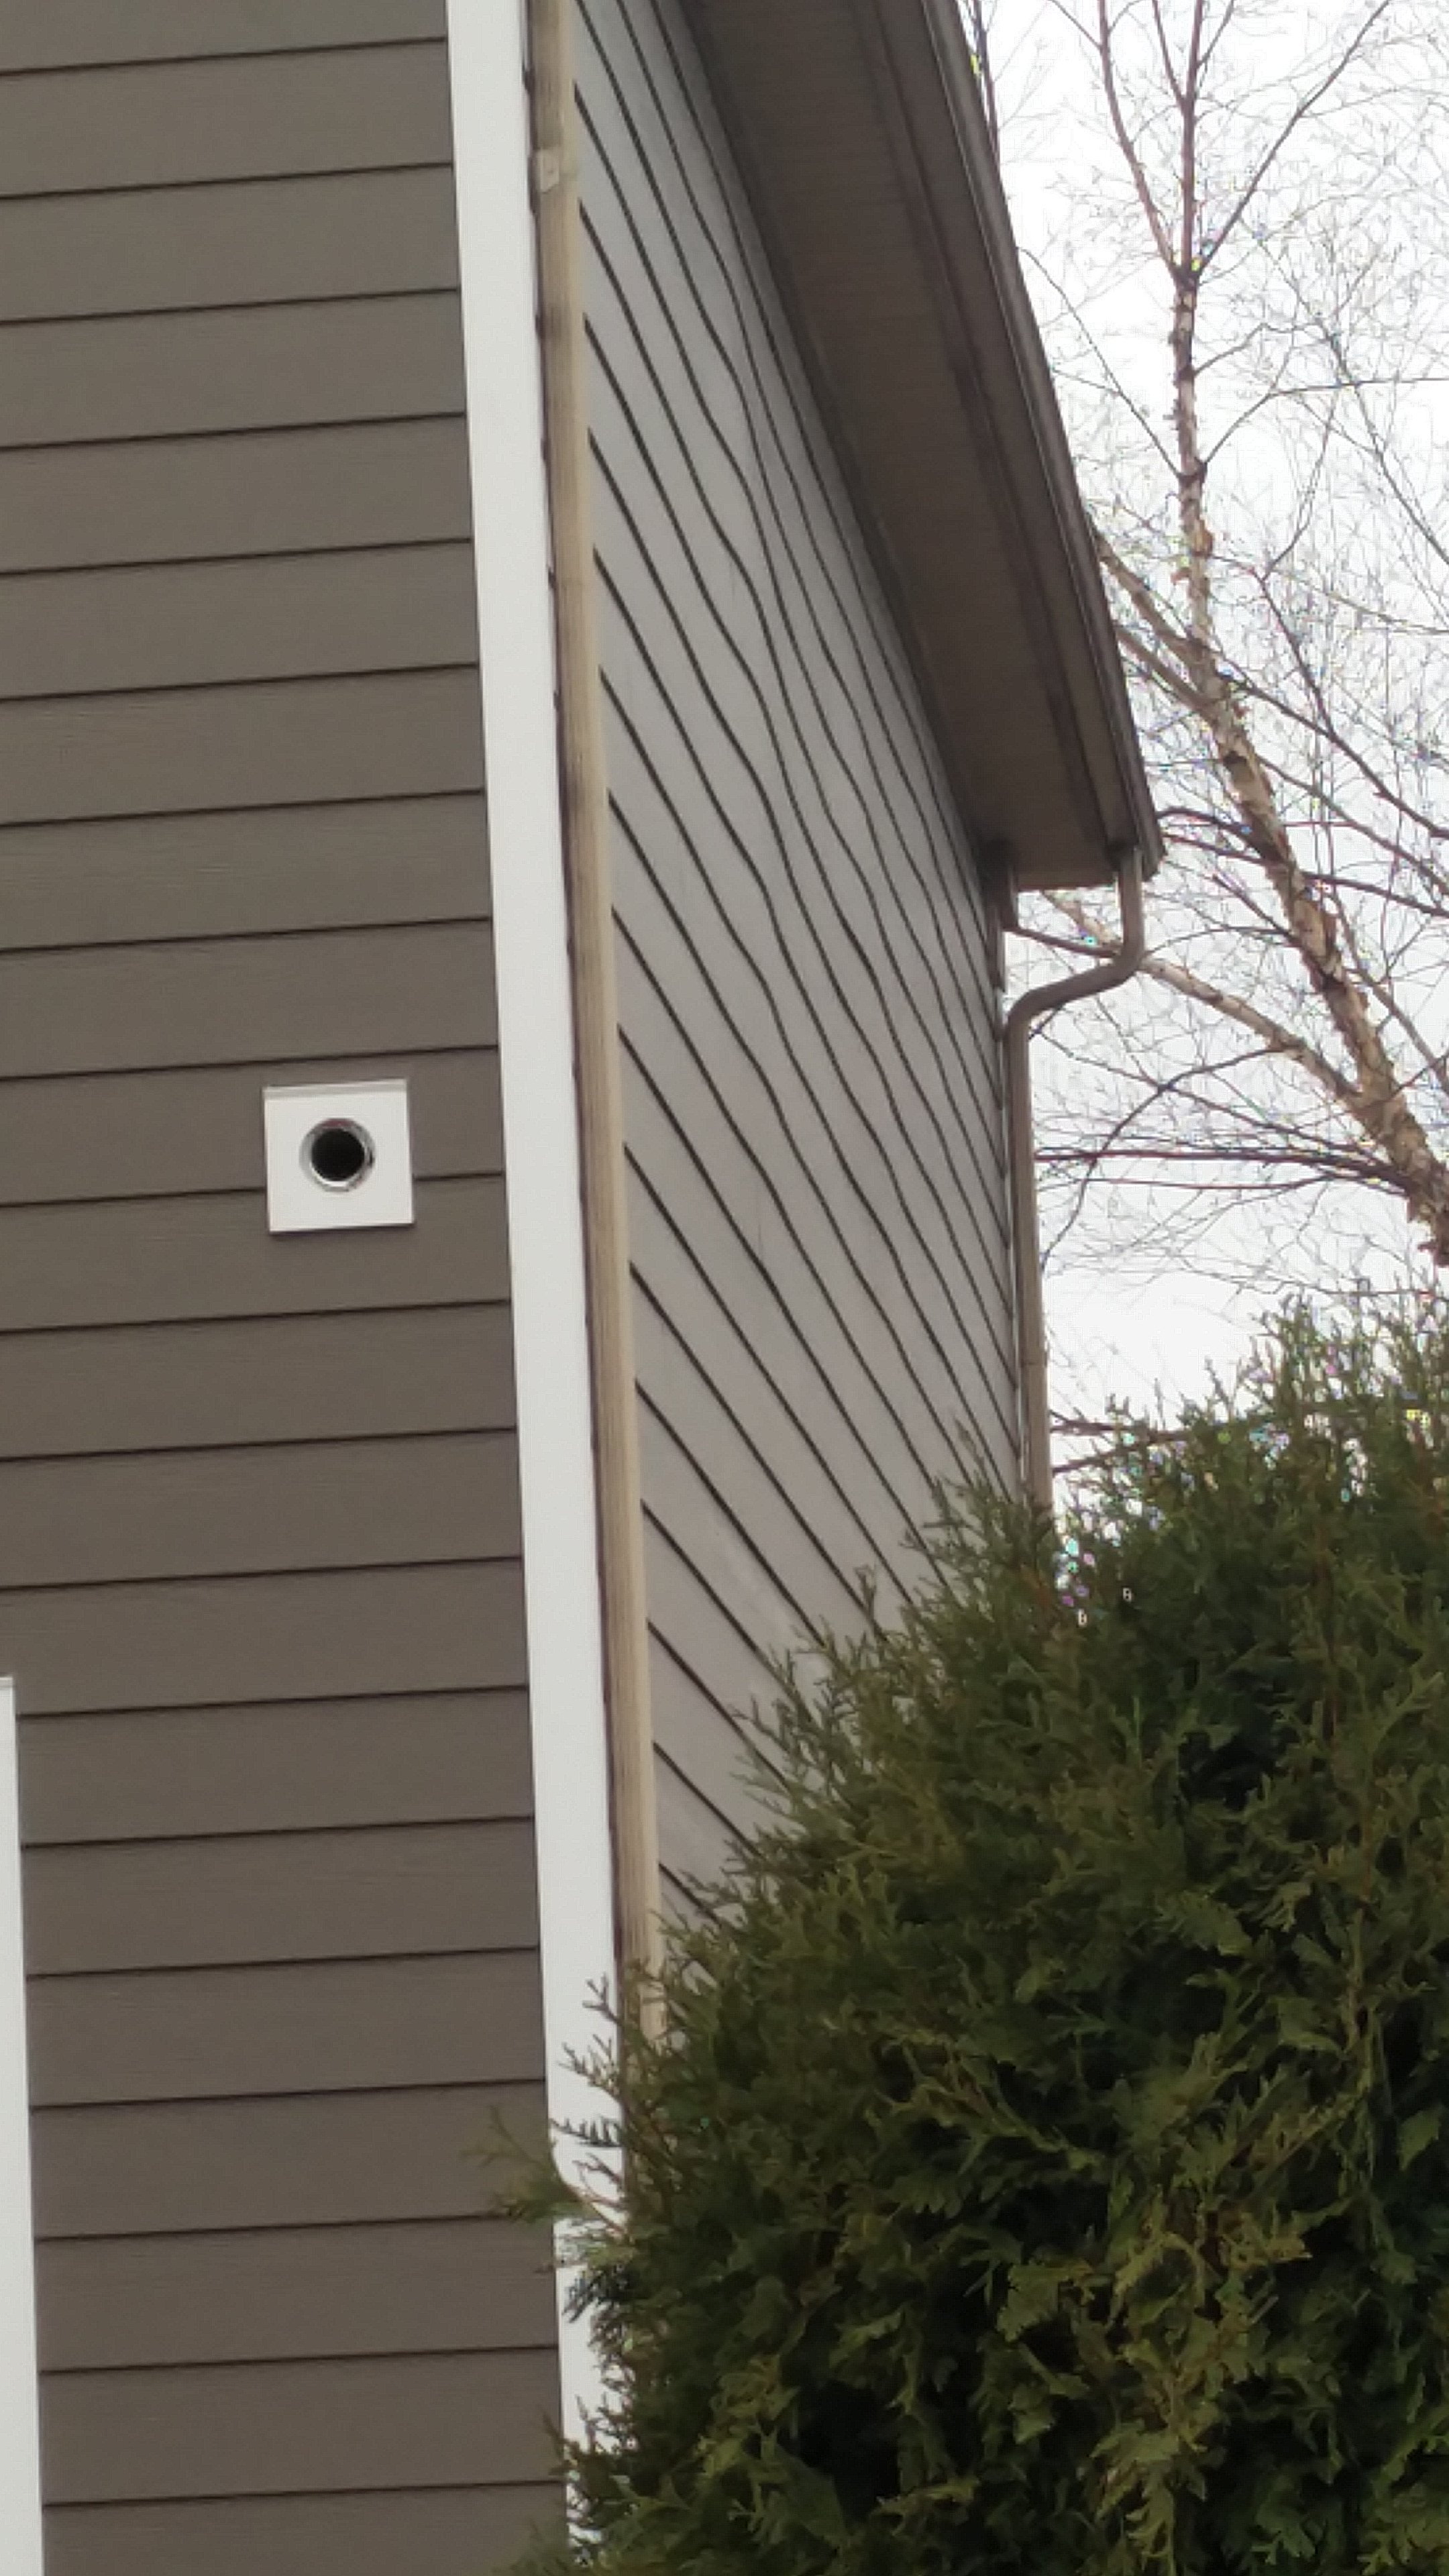 He doesn't put the proper vents for bathroom vents and if you look at the siding you can see where it's getting wavy and separating. If you were to stand beneath the siding wall you can see gaps acros